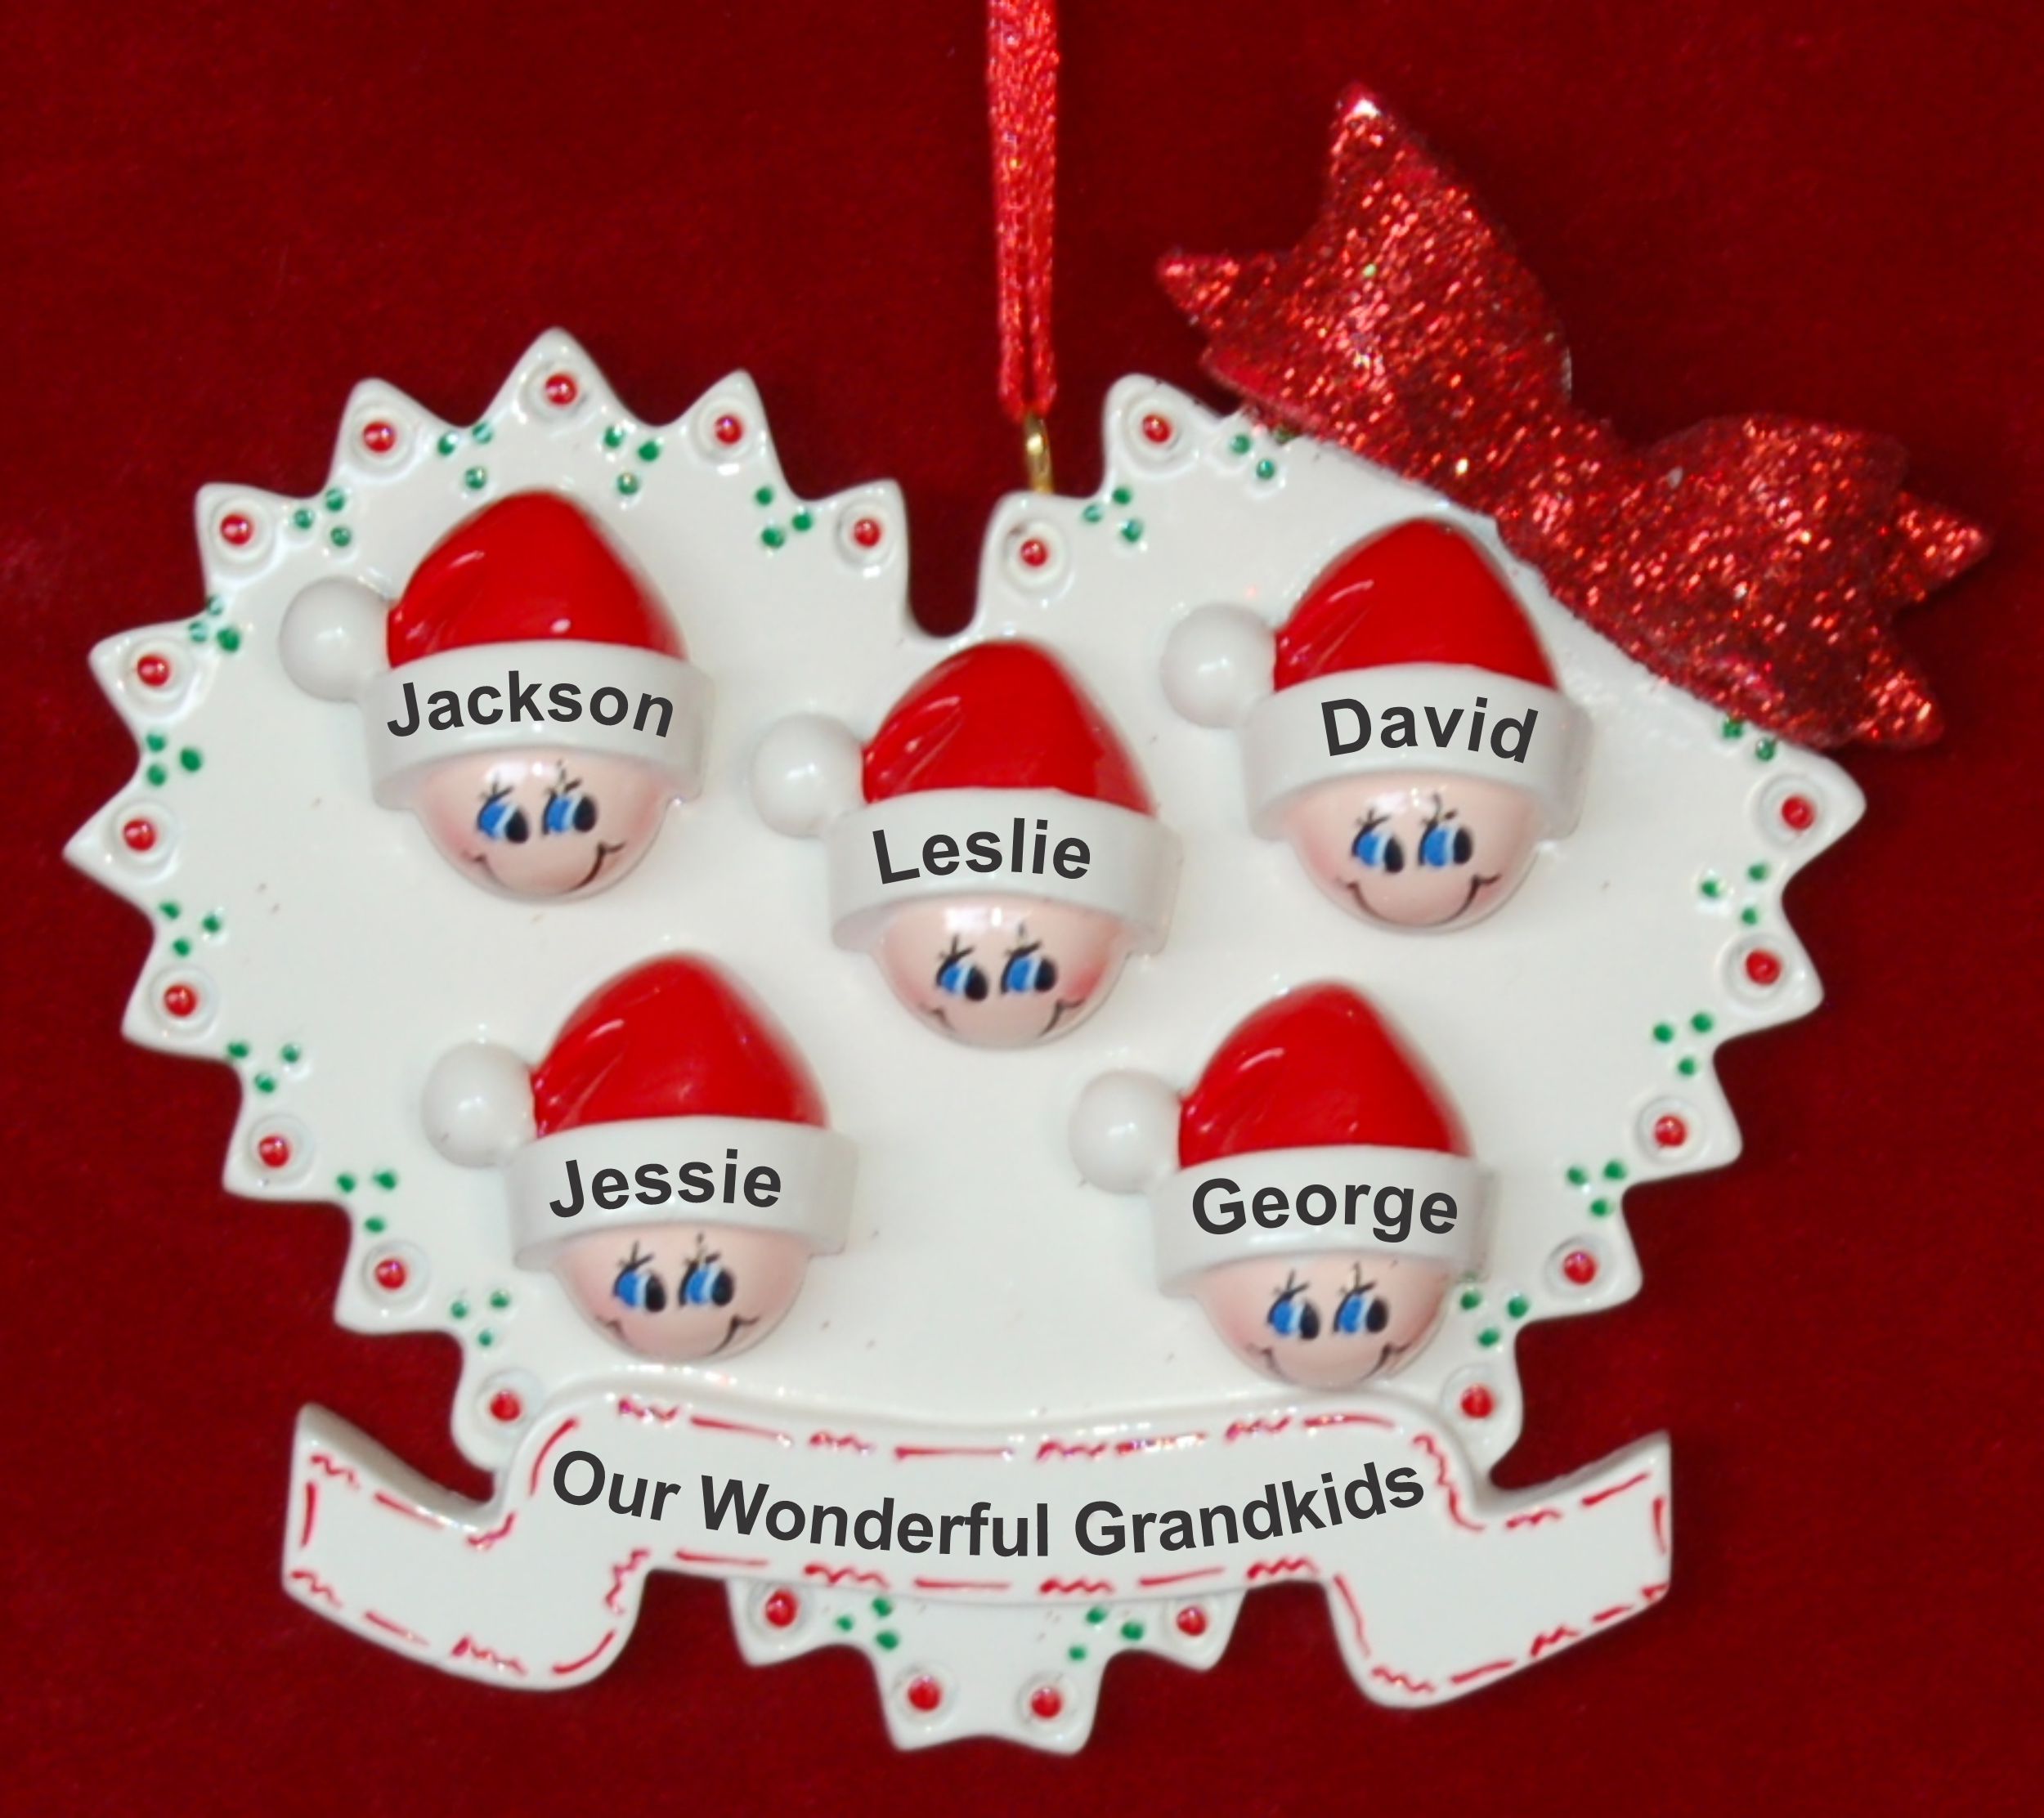 Grandparents Christmas Ornament Loving Heart 5 Grandkids Personalized by RussellRhodes.com